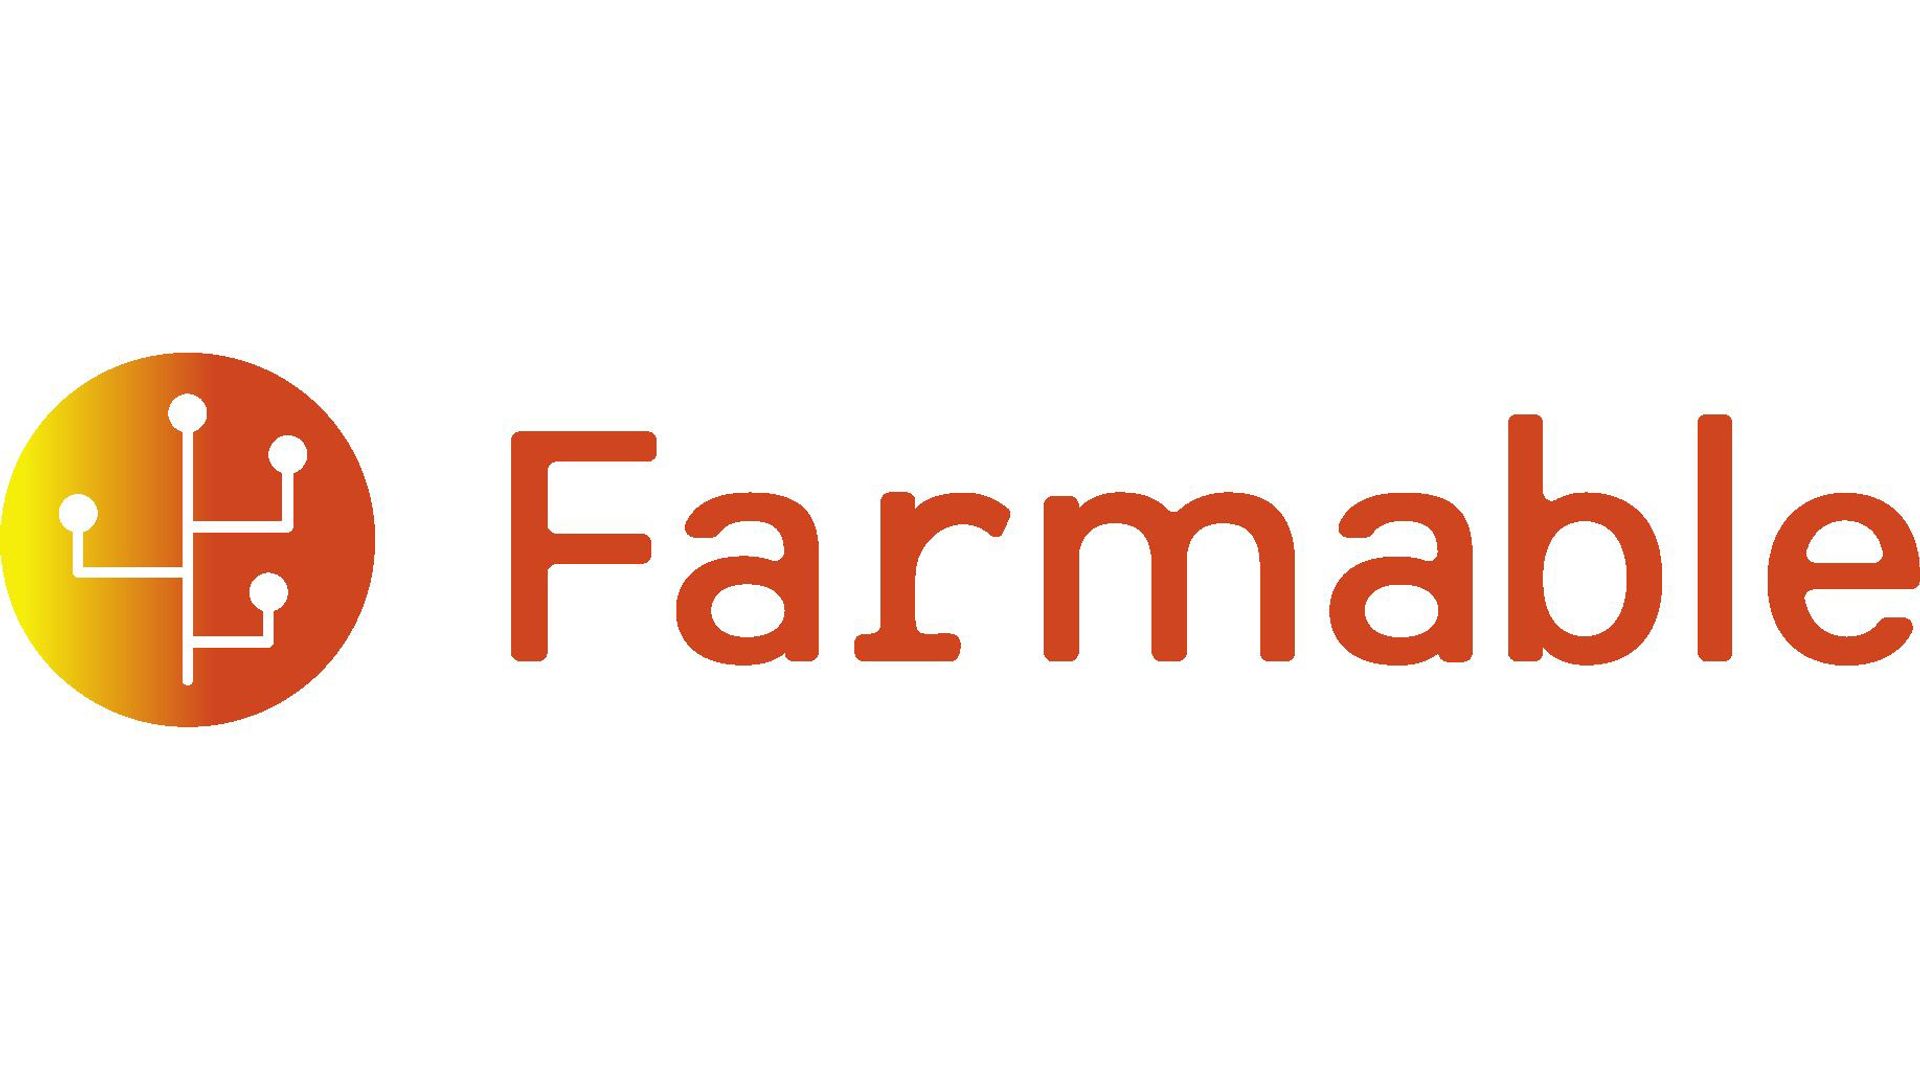 The logo of Farmable, the newest GLOBALG.A.P. associate member